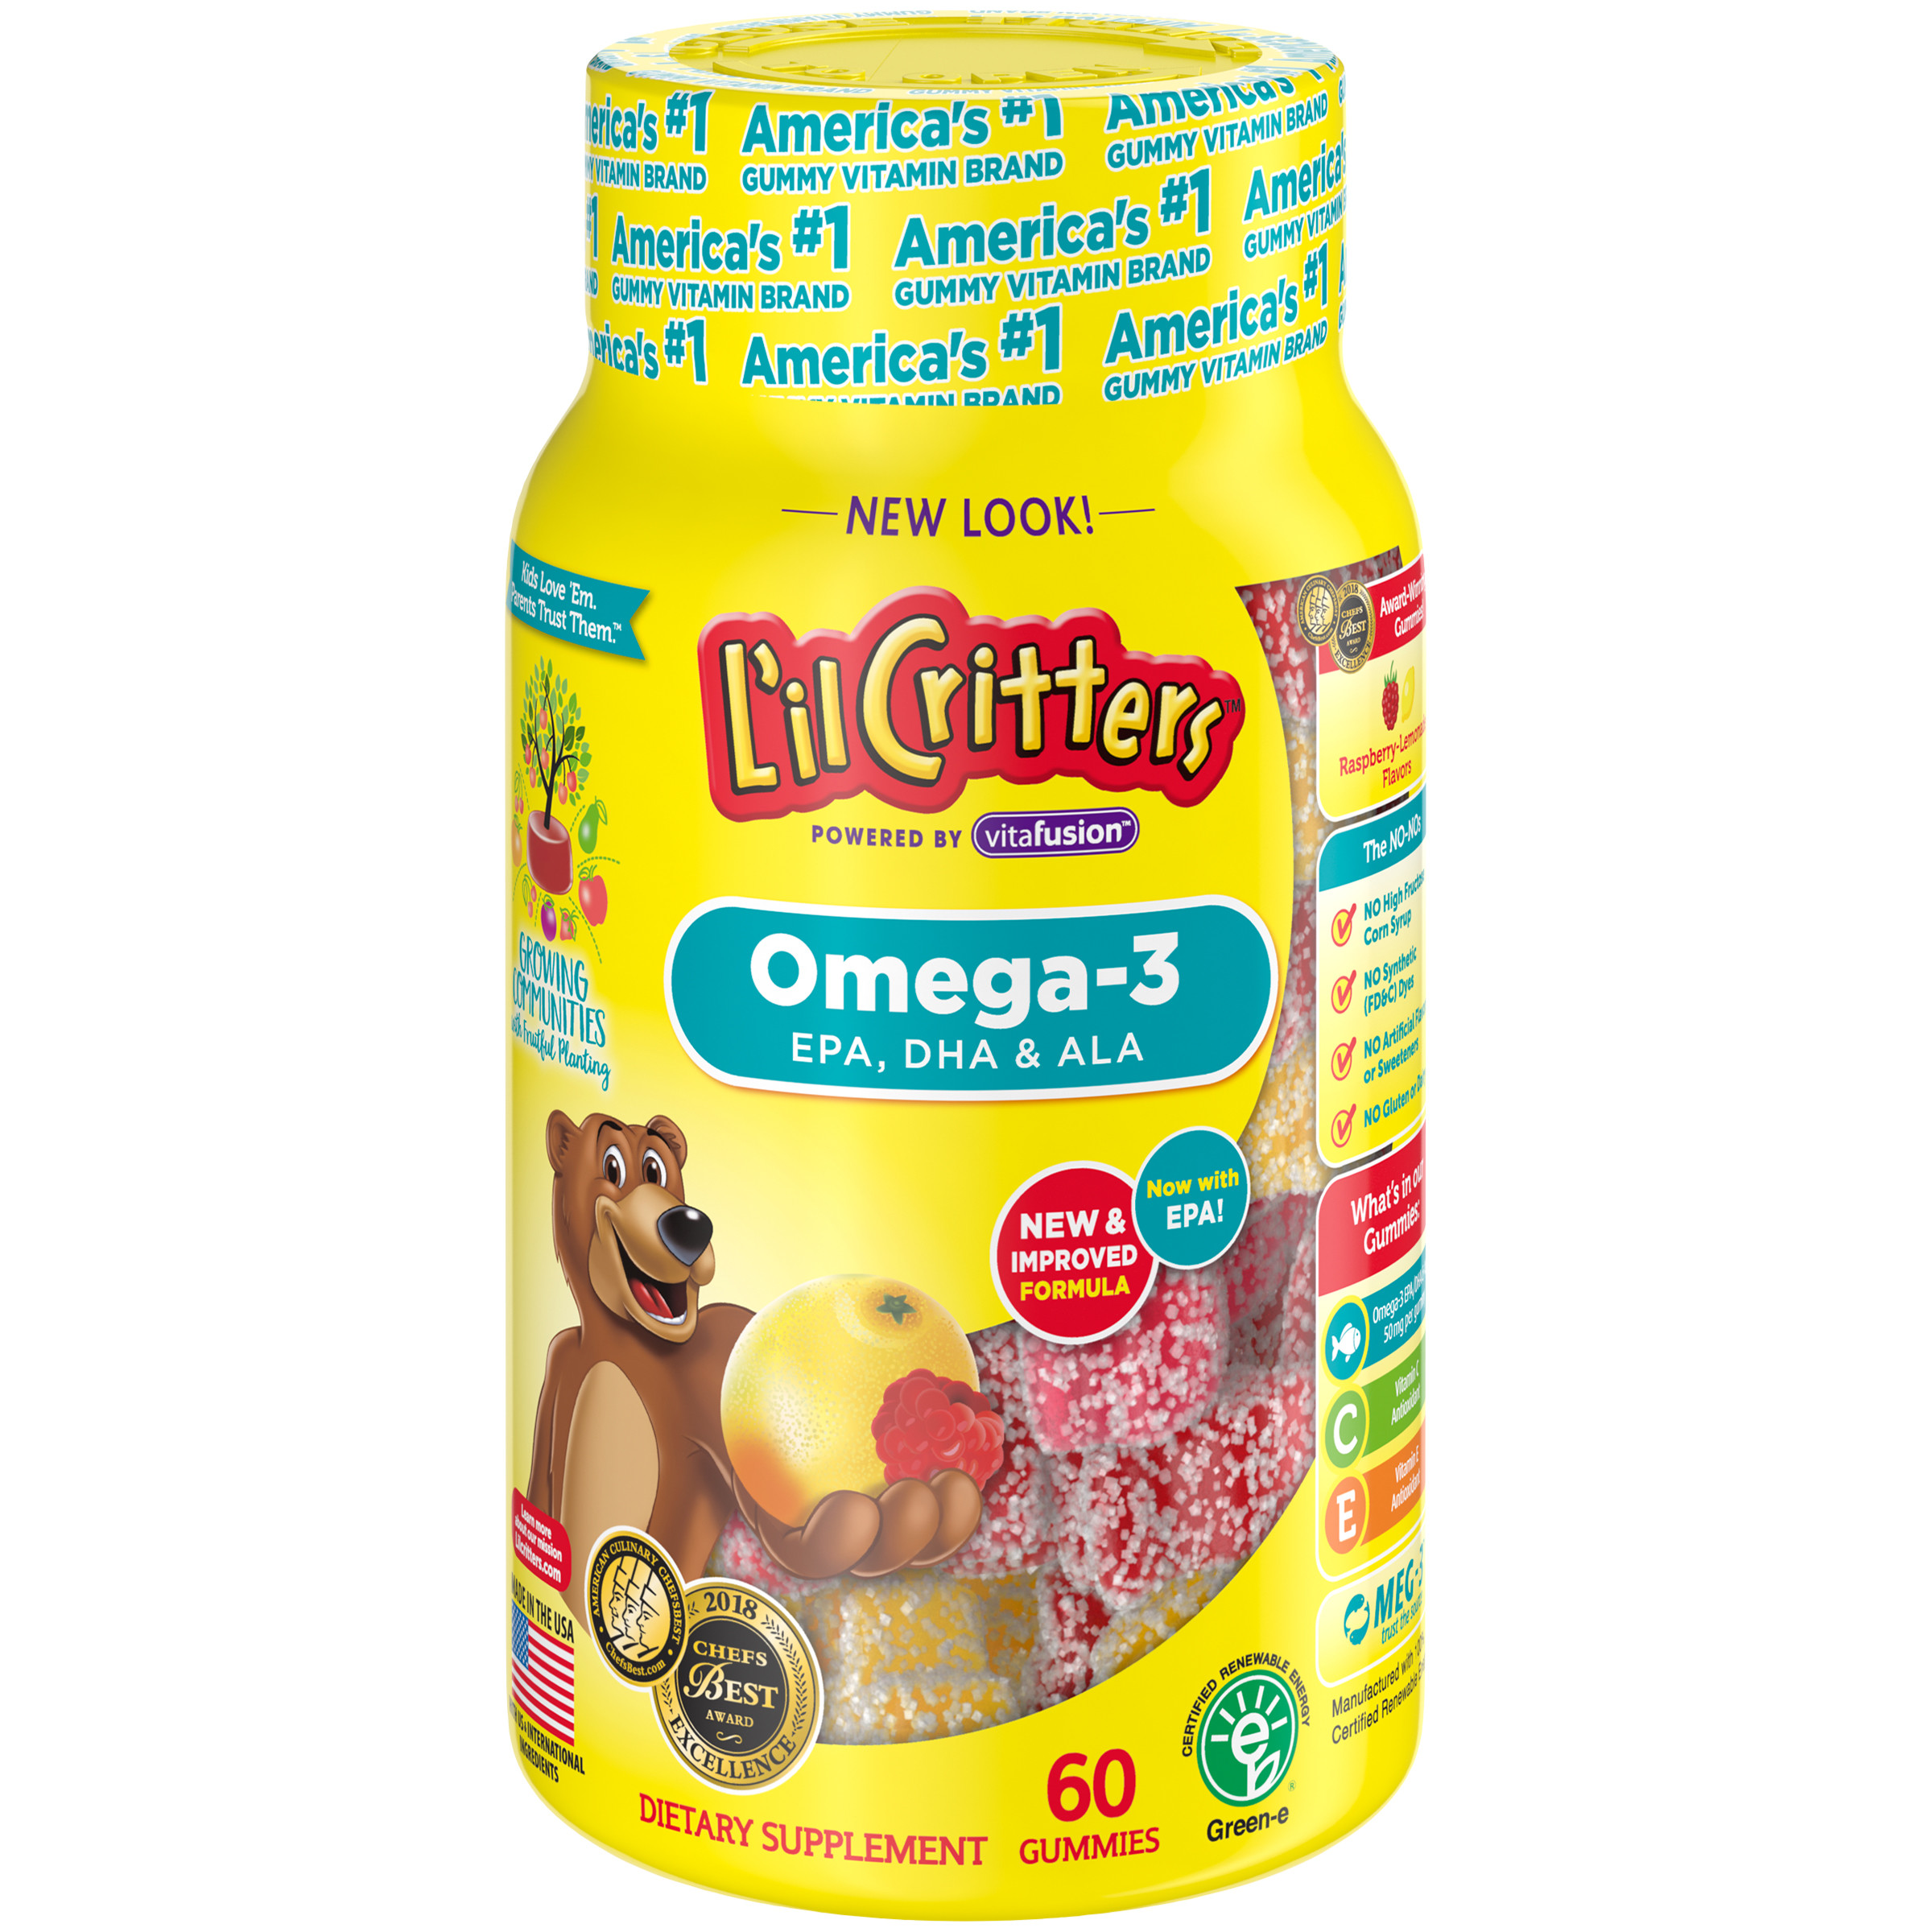 L'il Critters Kids Omega-3 Gummy, 3 fatty acids, DHA, EPA and ALA. 60 ct (30-60 day supply), Delicious Citrus Flavors (No Fishy Taste) from America's Number One Kids Gummy Vitamin Brand - image 1 of 8